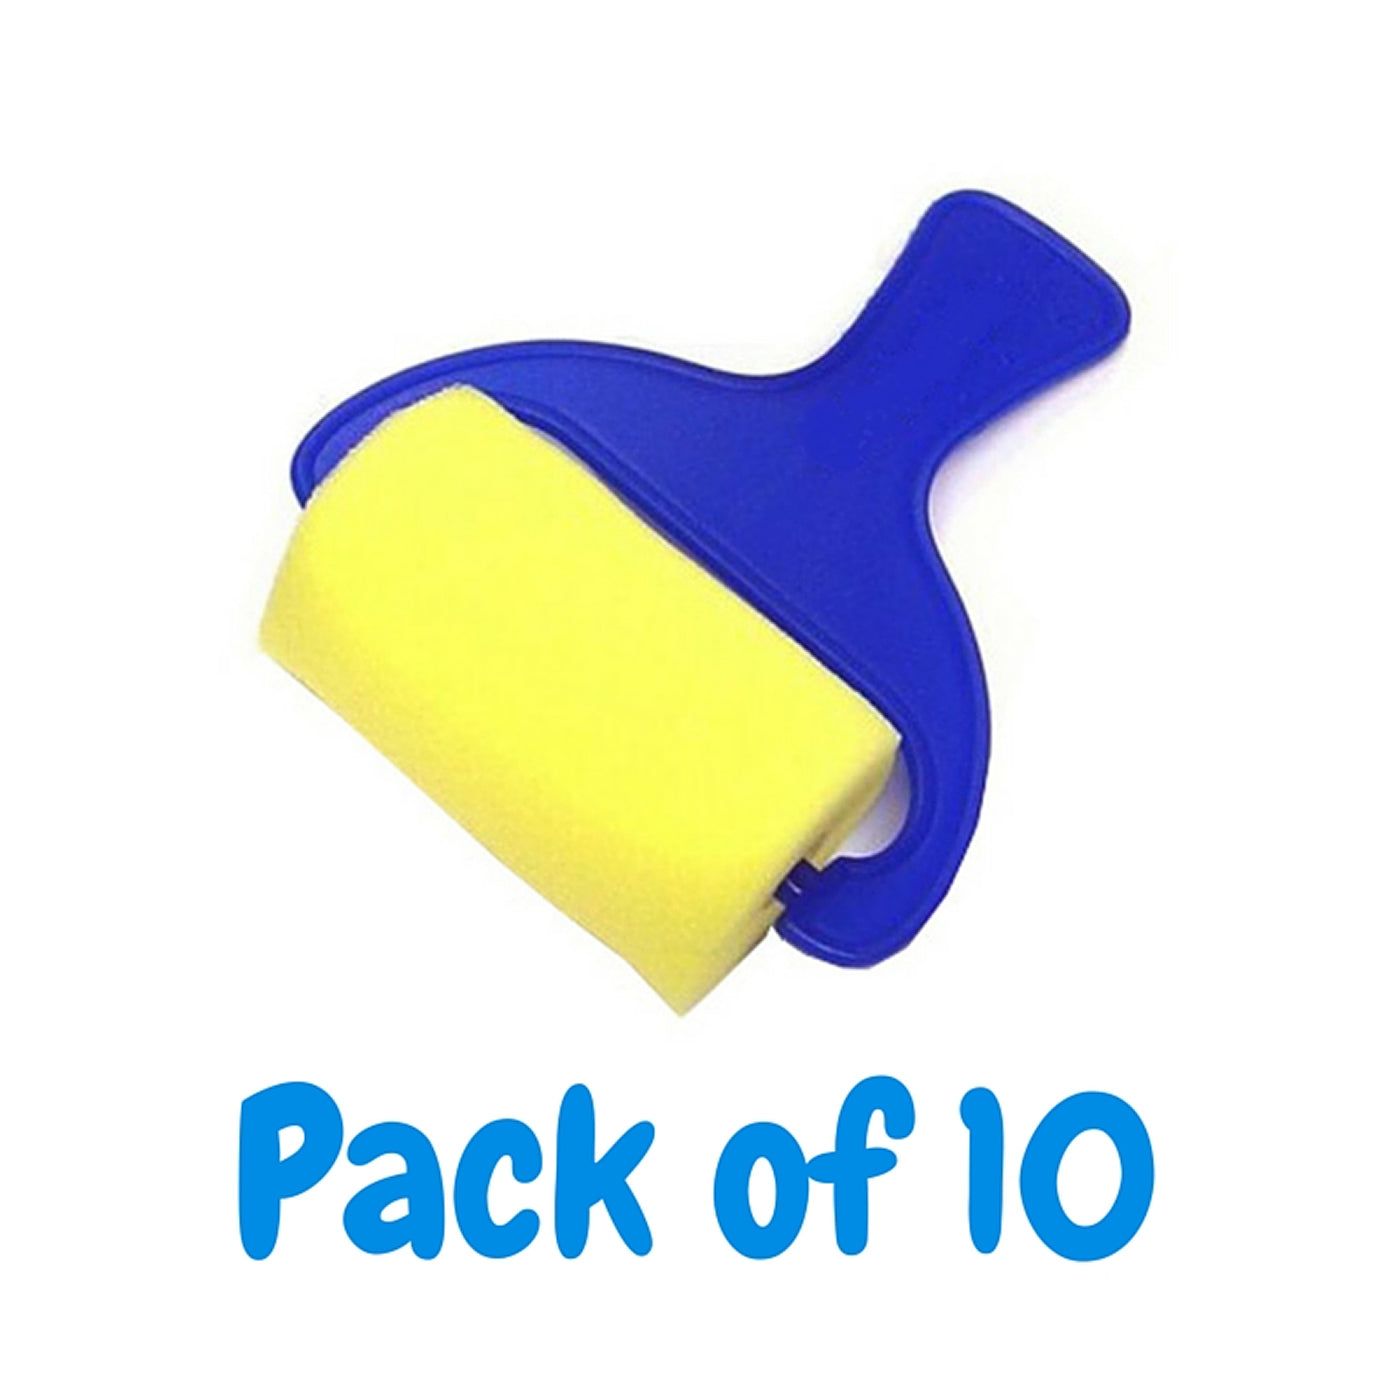 7.5cm Smooth Sponge Paint Roller Pack of 10